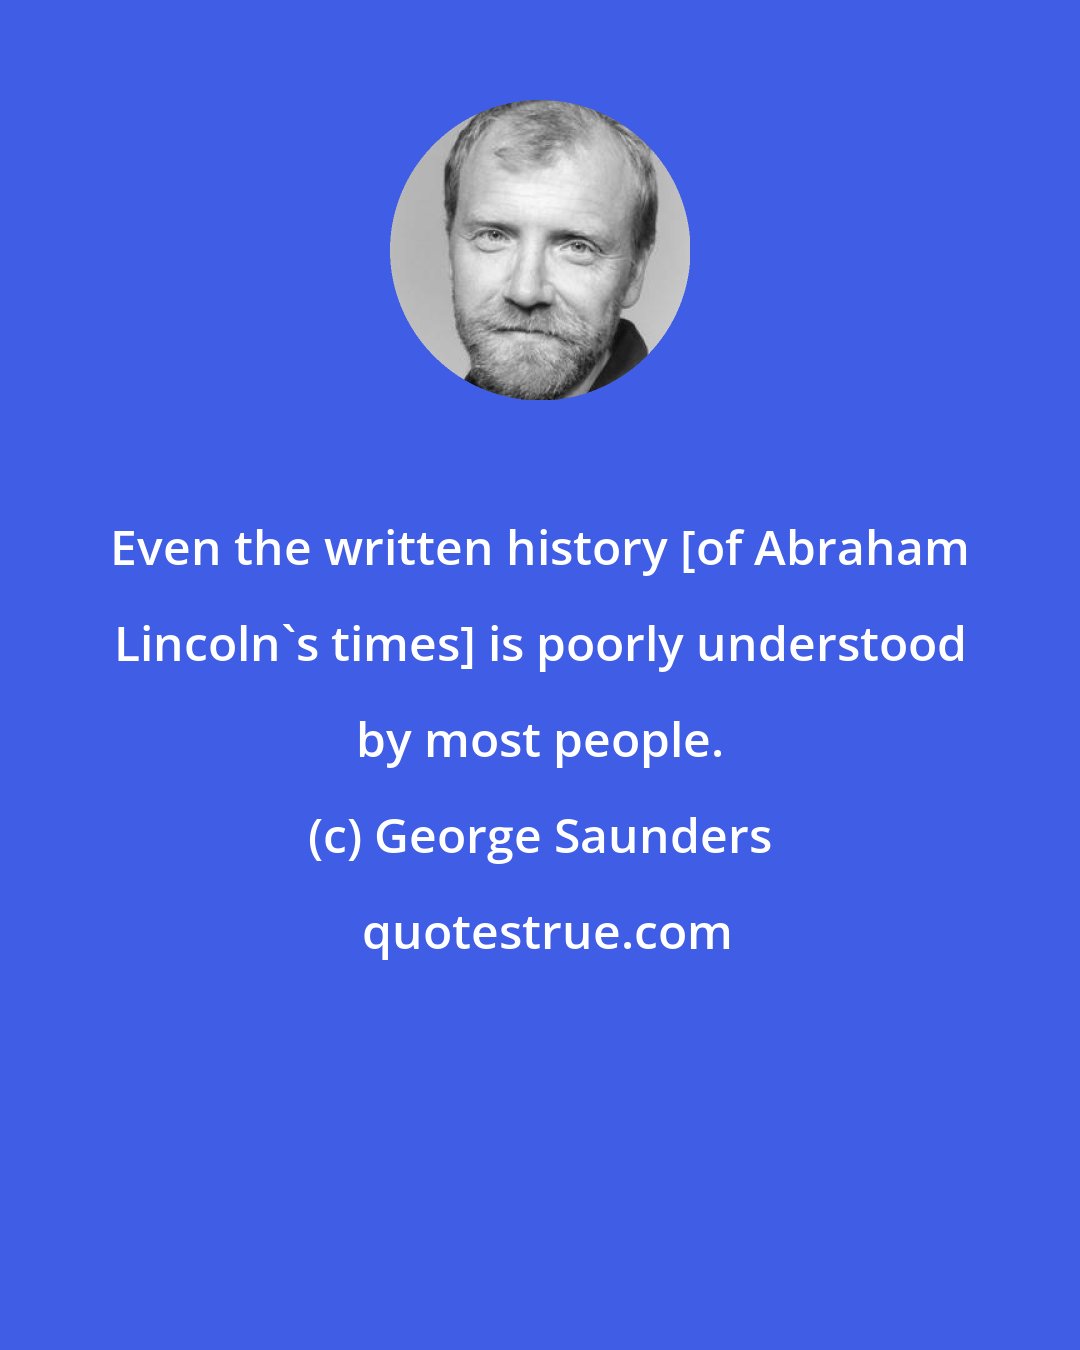 George Saunders: Even the written history [of Abraham Lincoln's times] is poorly understood by most people.